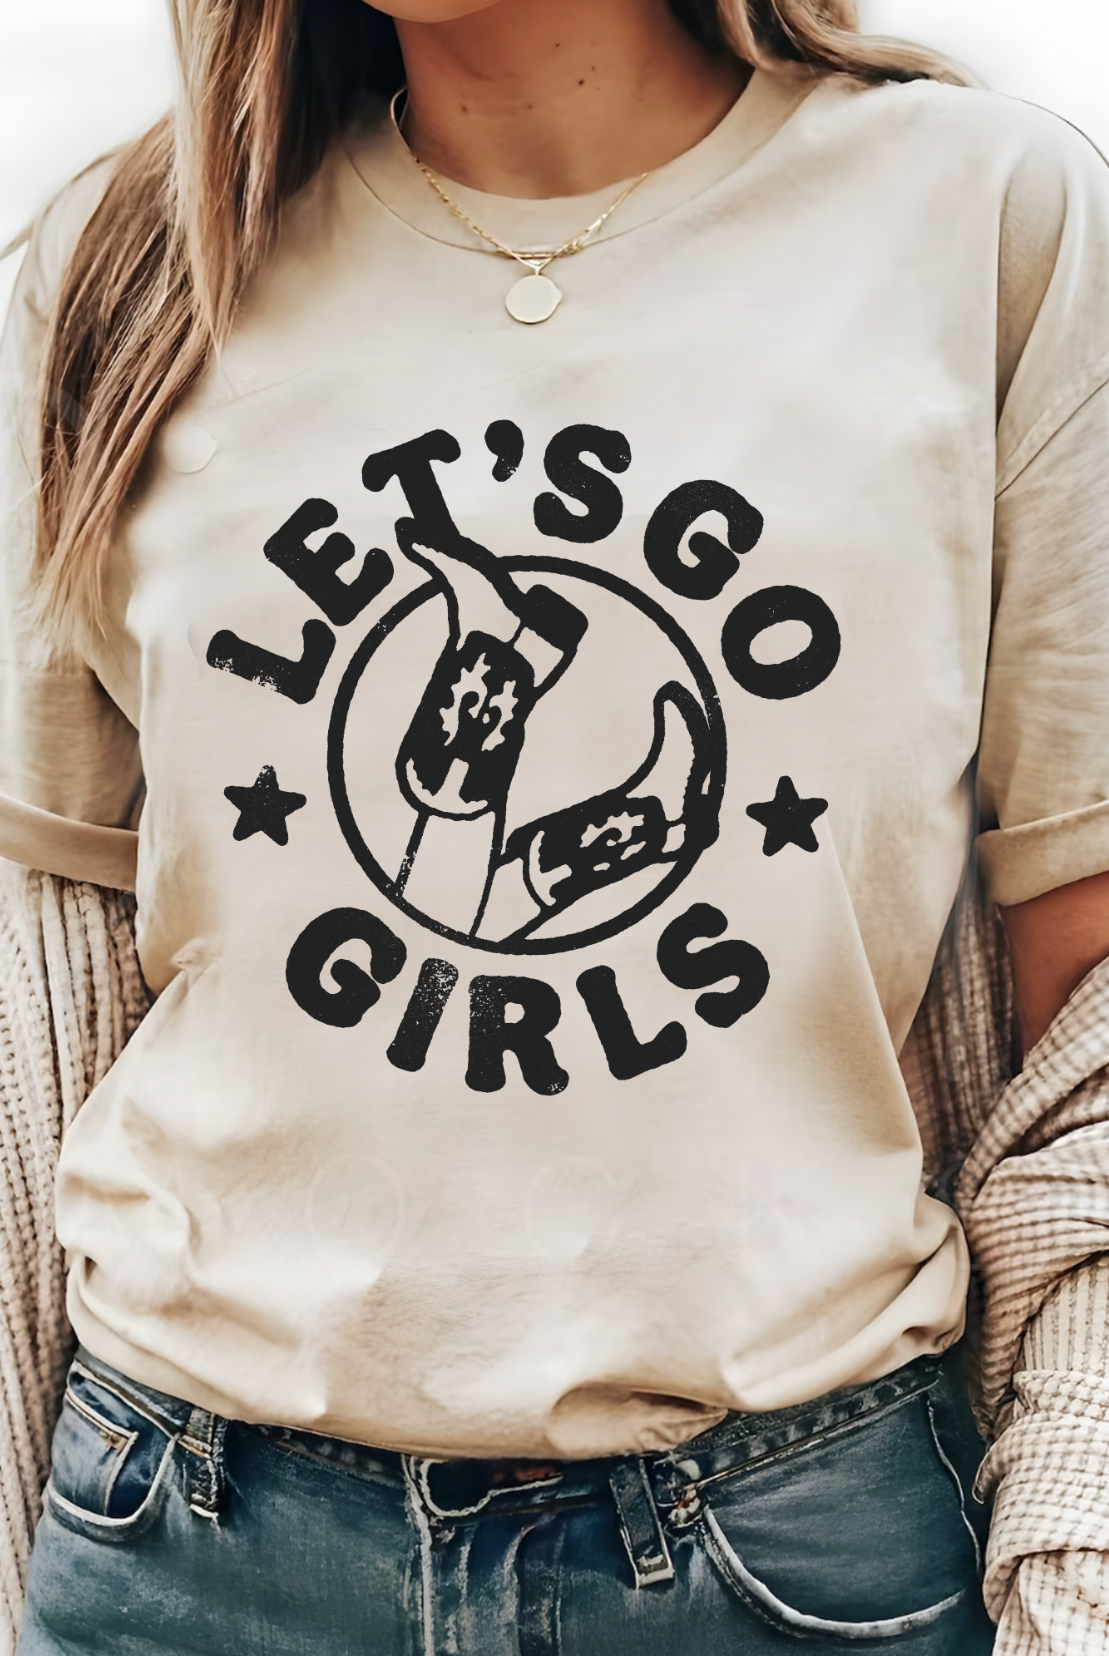 Let's Go Girls, Vintage, Country, Western, Distressed, Bella and Canvas, Hand-made apparel, Shipped from Texas, Cream Unisex Shirt.